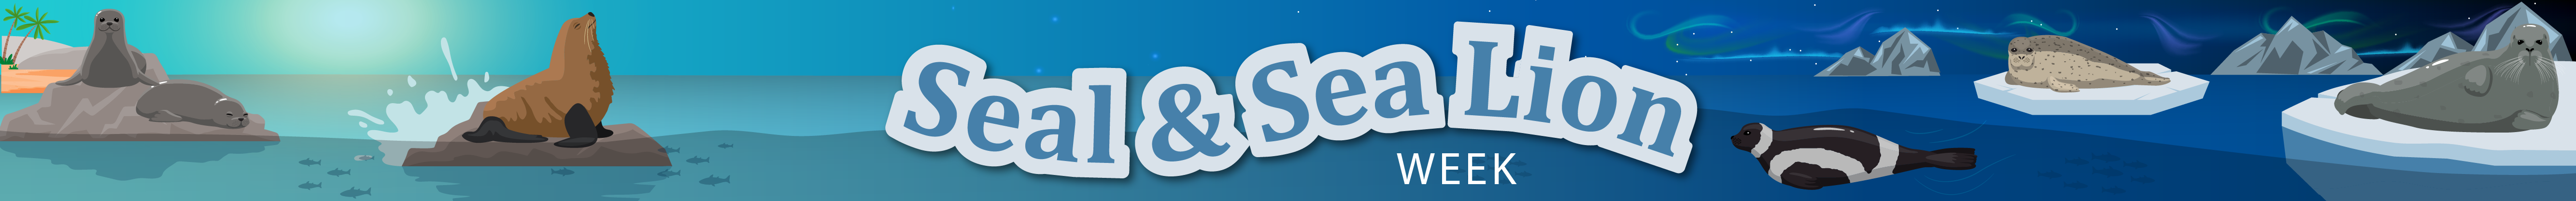 Illustration banner for Seal and Sea Lion Week during March 20-24